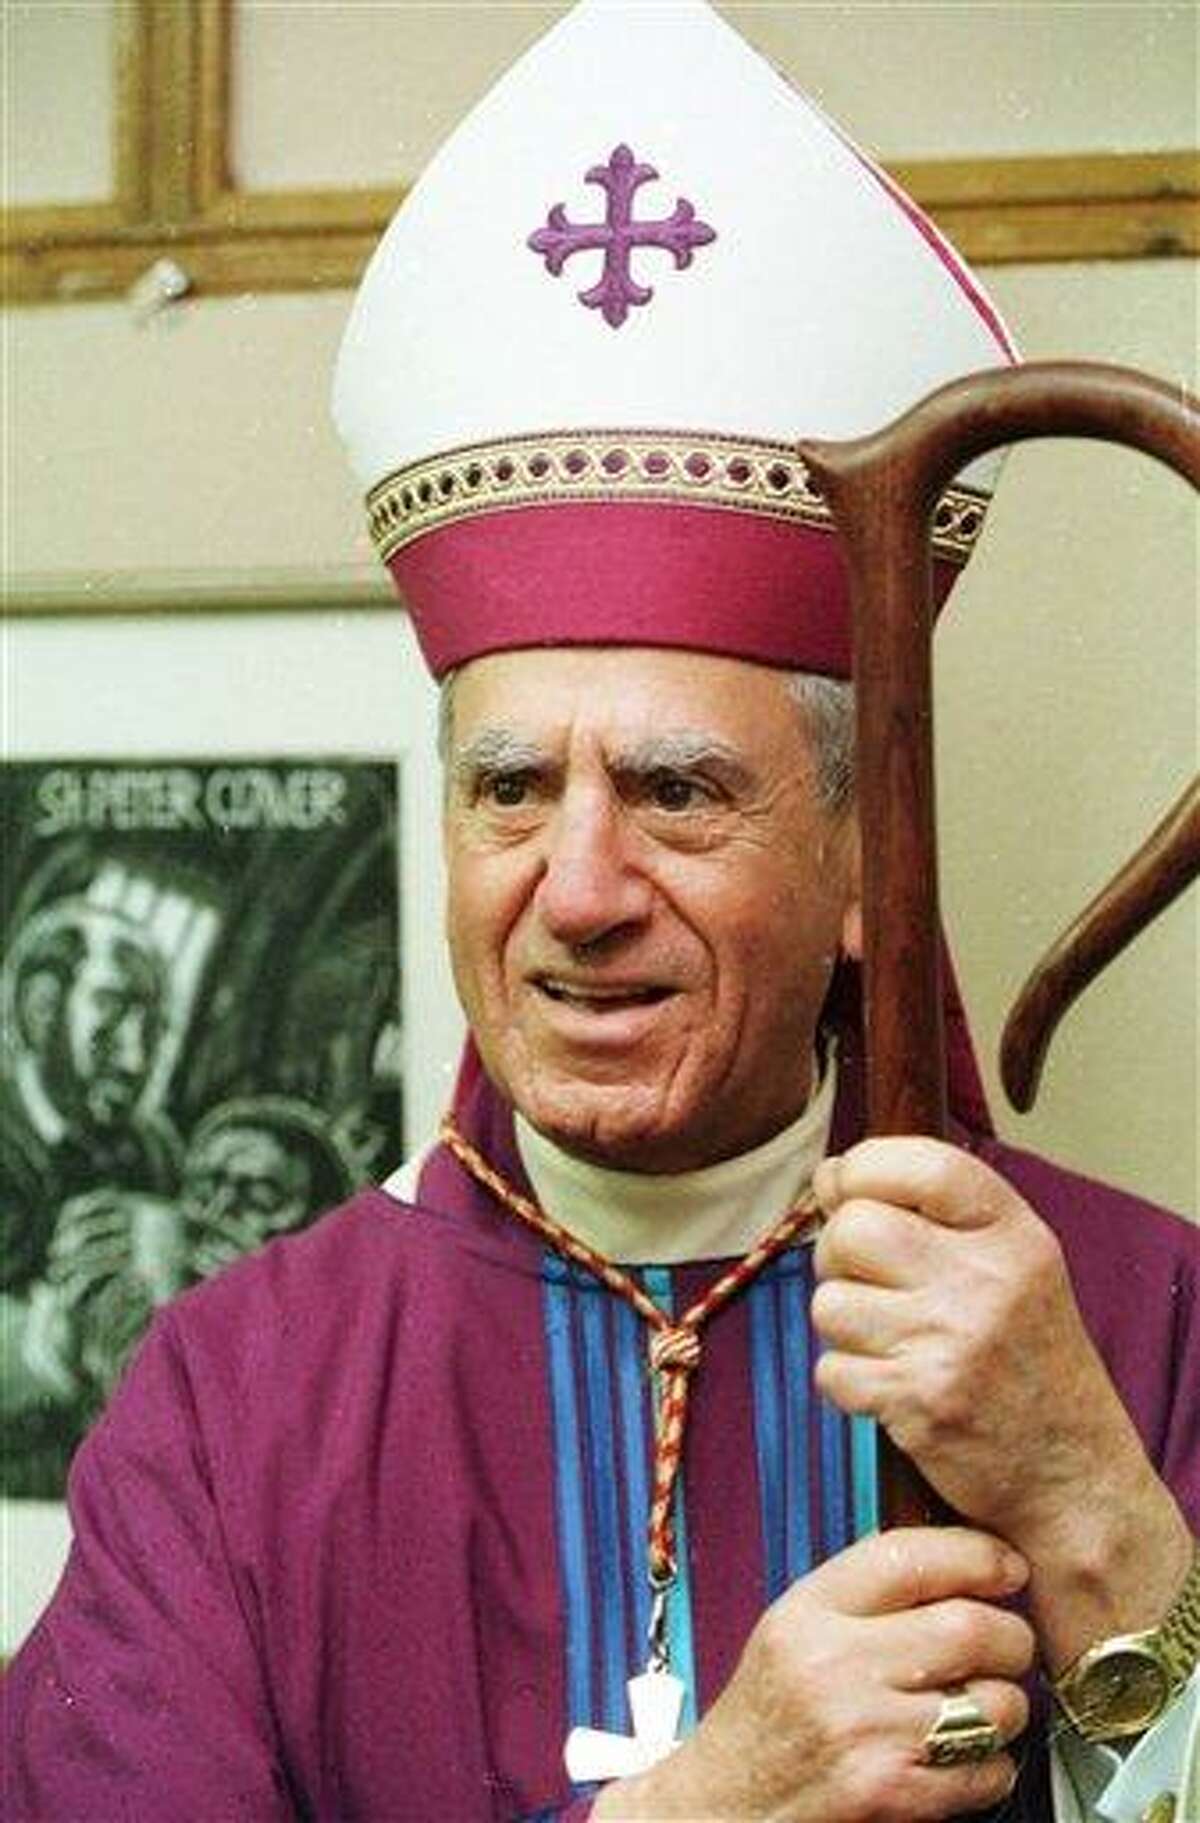 Philadelphia Cardinal Anthony J. Bevilacqua, is shown in this Dec. 2, 2000, file photo, taken in Philadelphia. The retired Cardinal, who served as head of the Archdiocese of Philadelphia for more than 15 years, died in his sleep Tuesday night in his apartment at St. Charles Borromeo Seminary in Wynnewood, Pa. He was 88. Associated Press